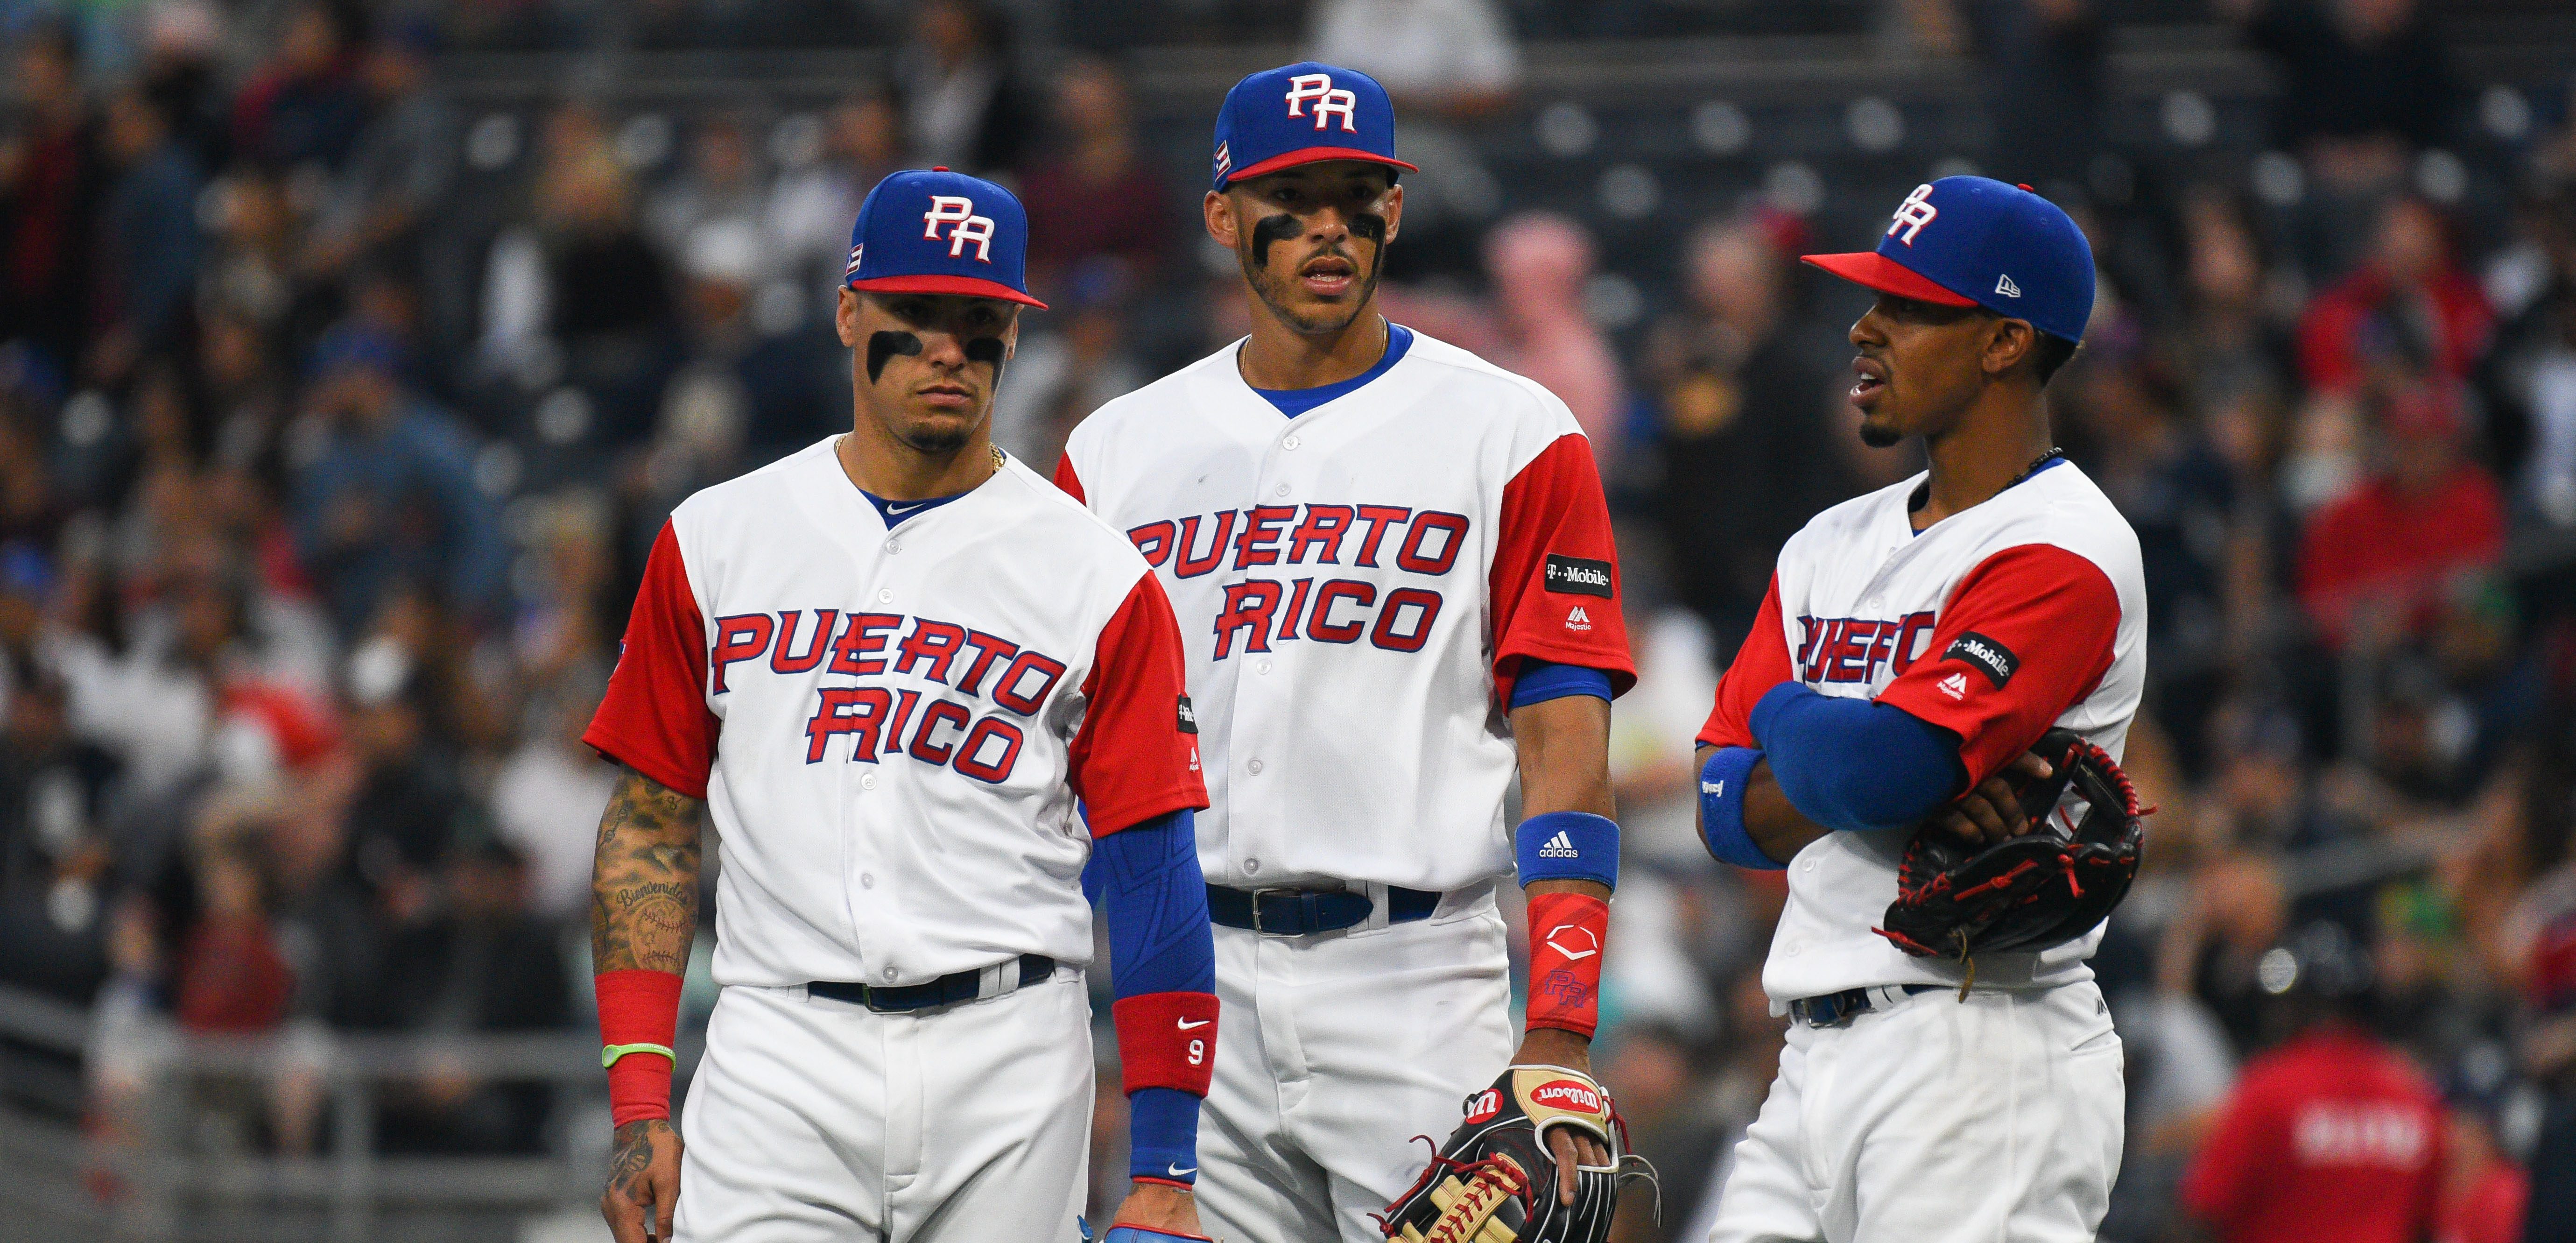 MLB on FOX - Team Mexico revealed their uniforms for the